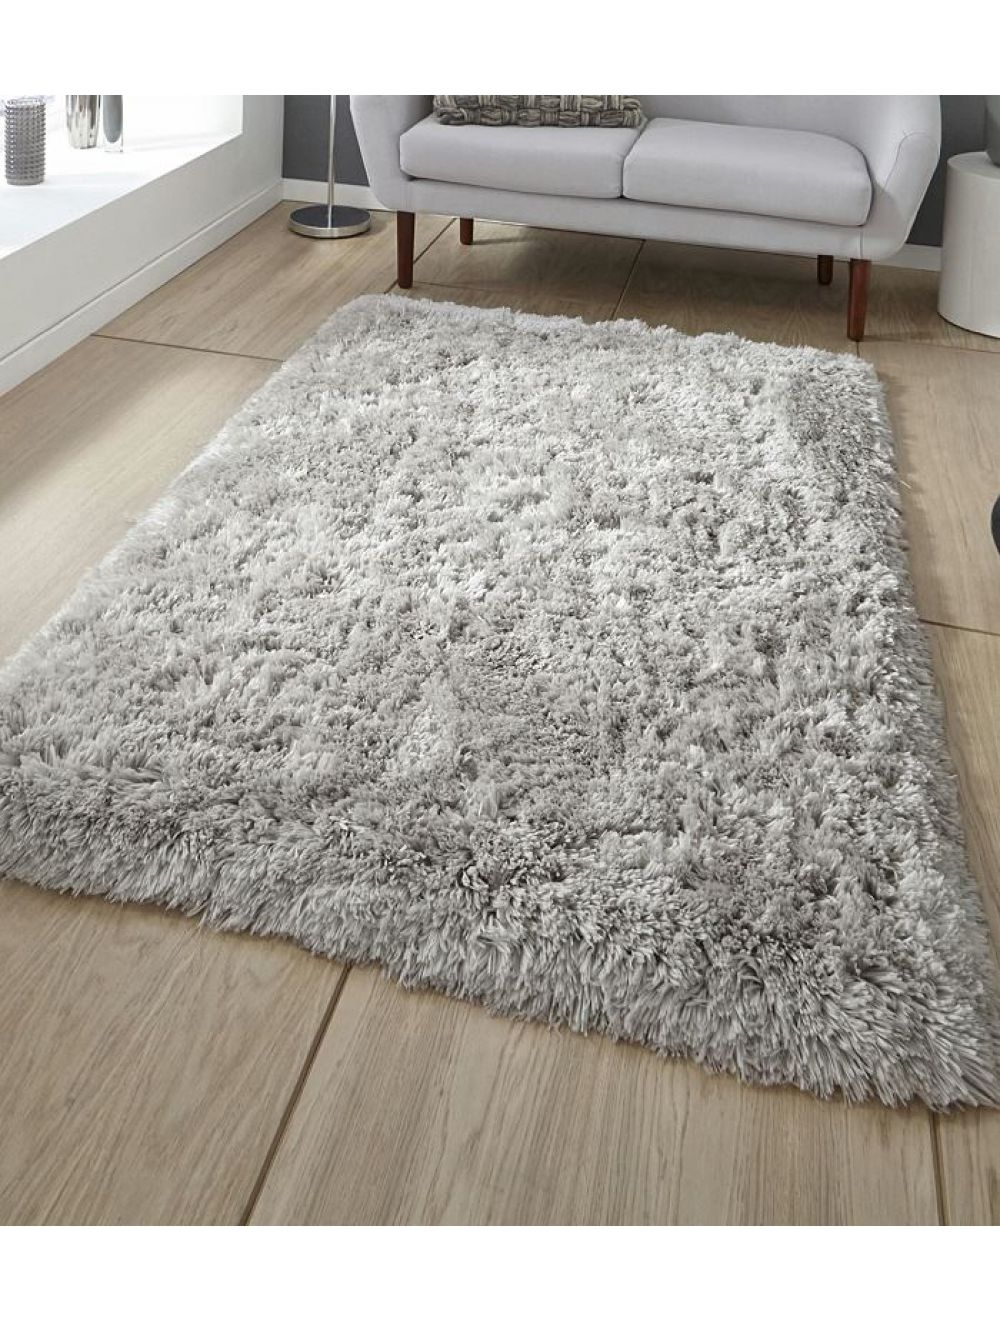 LARGE SMALL MODERN YELLOW THICK SOFT SHAGGY PREMIUM LUXURY 8.5cm DENSE PILE RUGS 